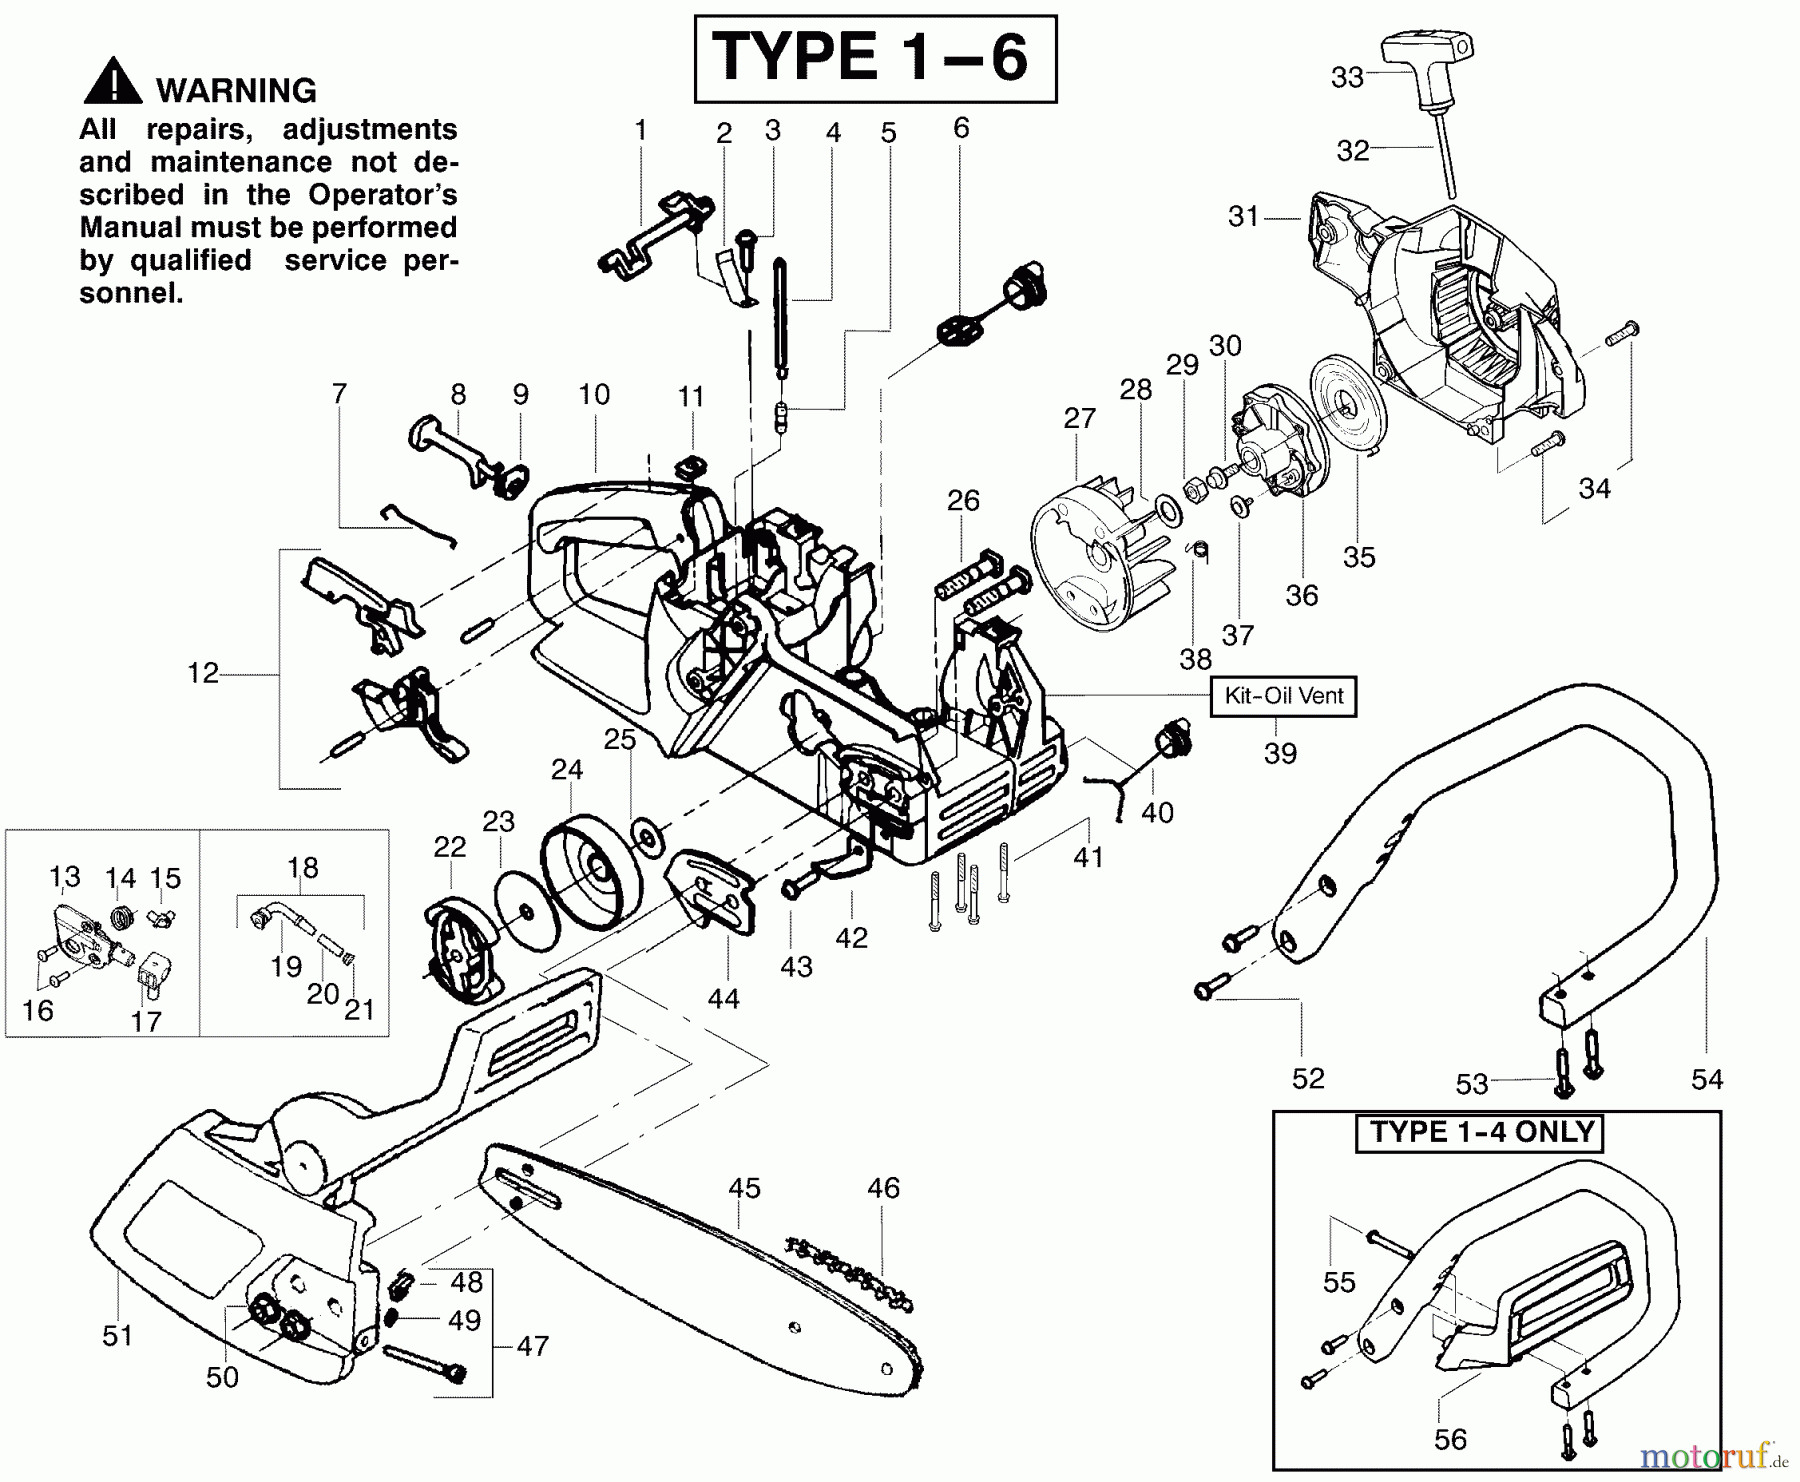  Poulan / Weed Eater Motorsägen 1950 (Type 4) - Poulan Woodshark Chainsaw Chassis & Bar Assembly Type 1-6